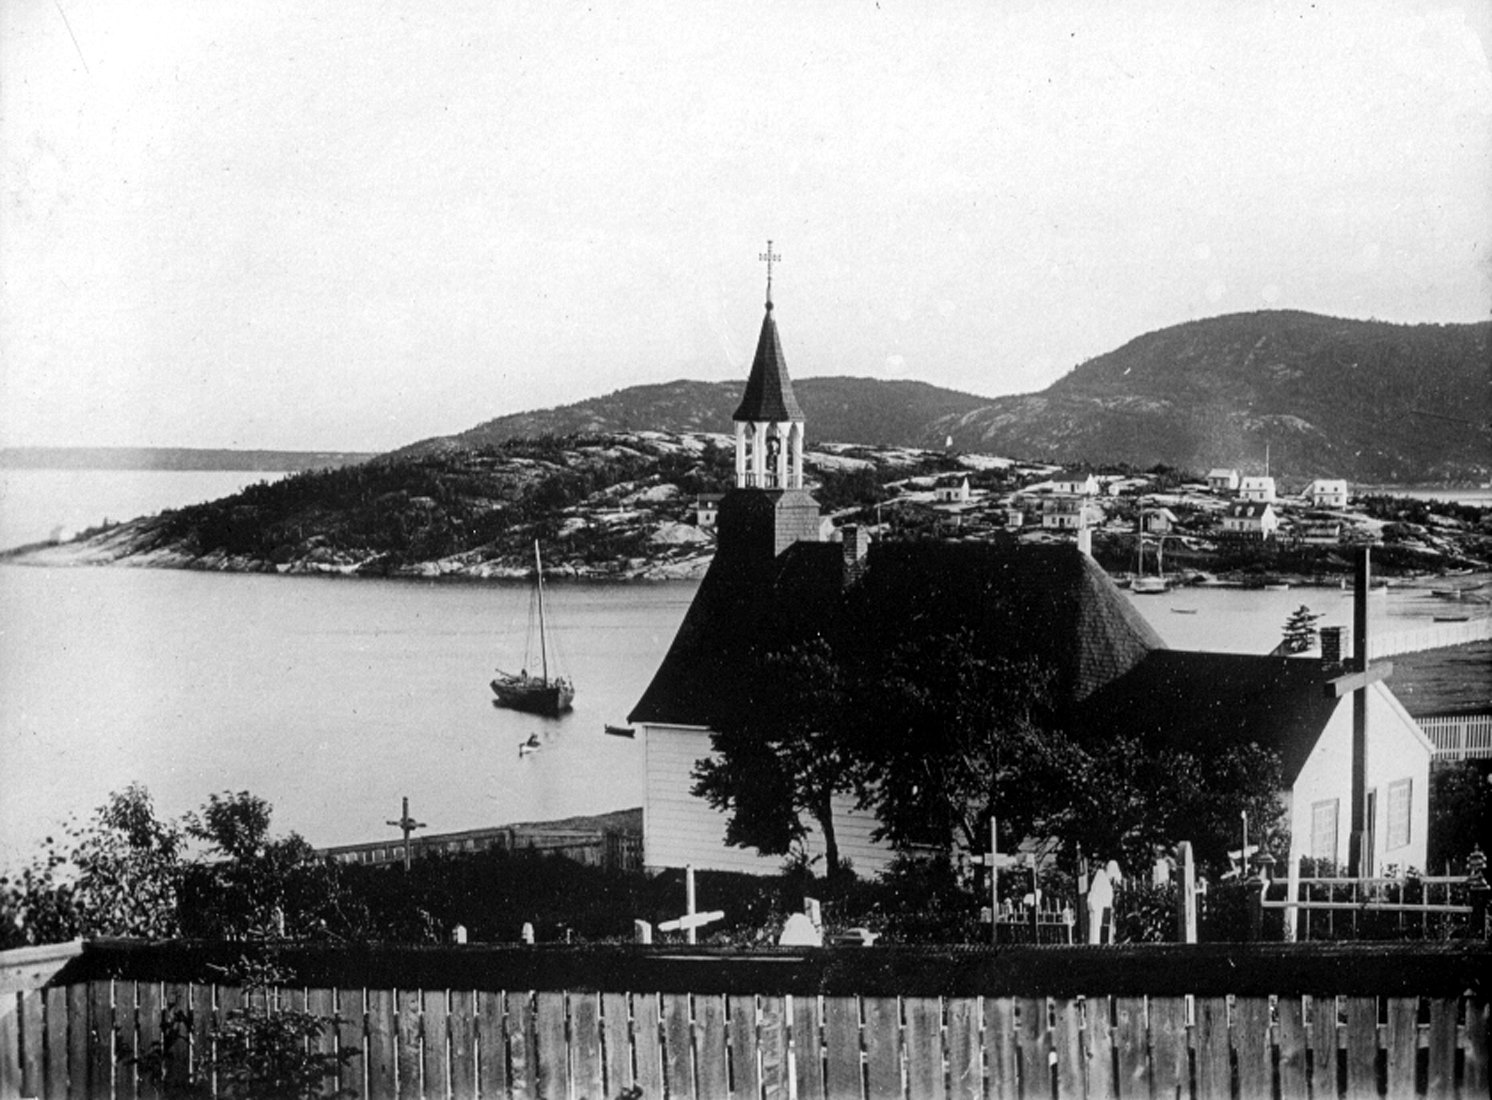 A chapel and its cemetery overlooking a bay where boats, including two sailboats, are anchored.